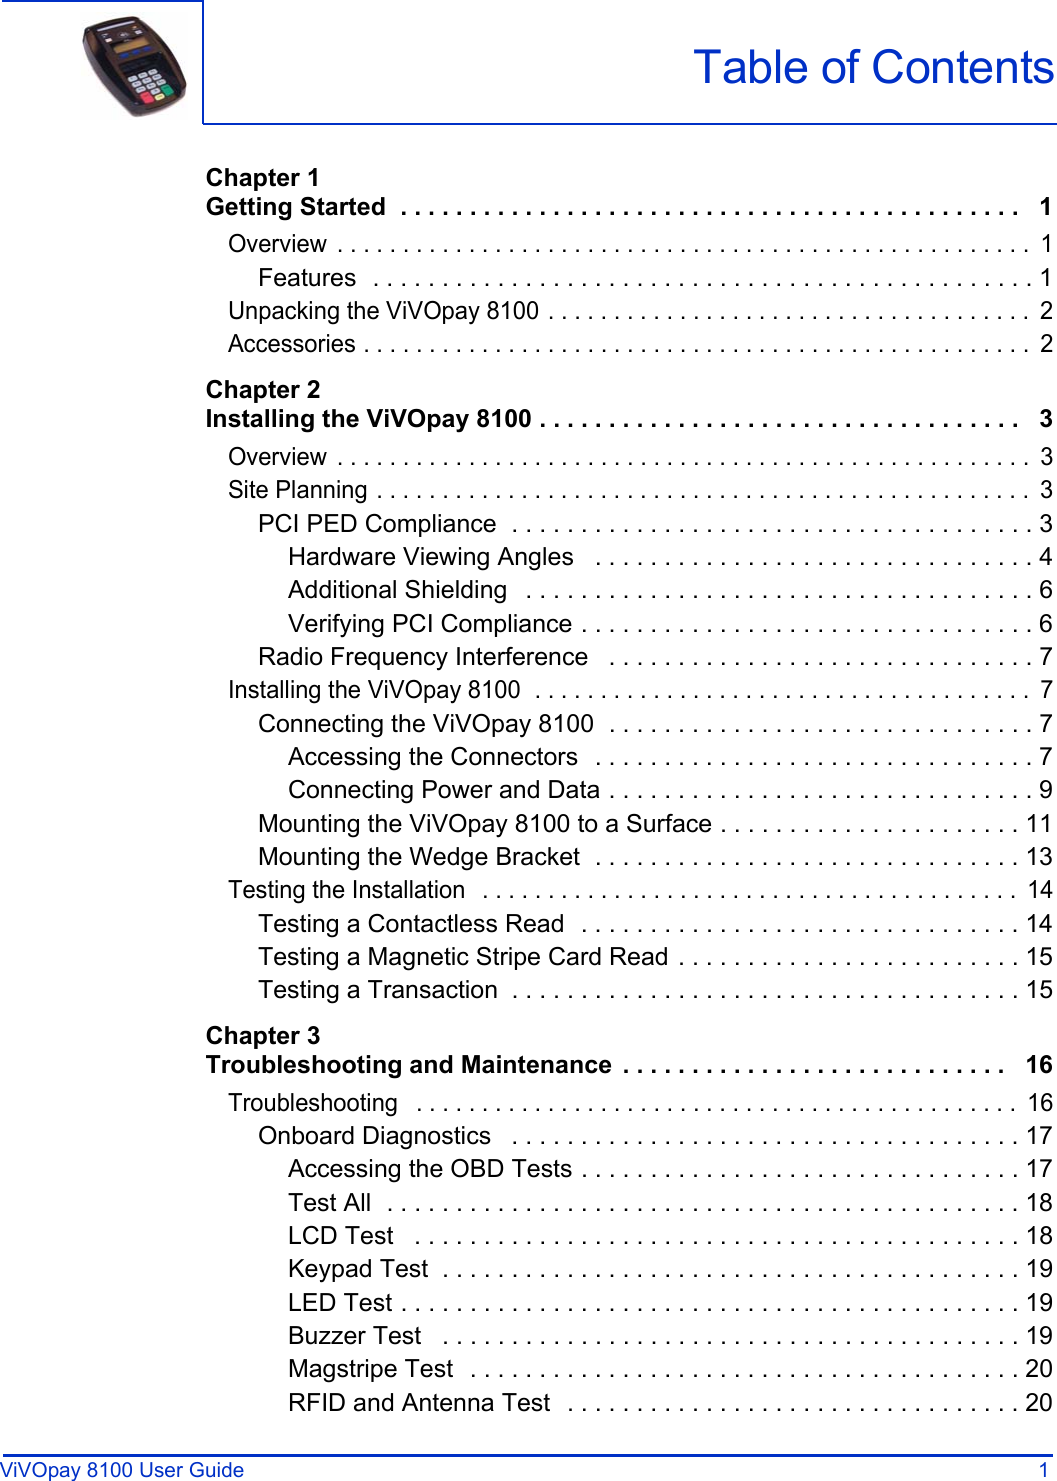 ViVOpay 8100 User Guide 1               Chapter 1Getting Started  . . . . . . . . . . . . . . . . . . . . . . . . . . . . . . . . . . . . . . . . . . . . .   1Overview  . . . . . . . . . . . . . . . . . . . . . . . . . . . . . . . . . . . . . . . . . . . . . . . . . . . . .  1Features  . . . . . . . . . . . . . . . . . . . . . . . . . . . . . . . . . . . . . . . . . . . . . . . . 1Unpacking the ViVOpay 8100 . . . . . . . . . . . . . . . . . . . . . . . . . . . . . . . . . . . . .  2Accessories . . . . . . . . . . . . . . . . . . . . . . . . . . . . . . . . . . . . . . . . . . . . . . . . . . .  2Chapter 2Installing the ViVOpay 8100 . . . . . . . . . . . . . . . . . . . . . . . . . . . . . . . . . . .   3Overview  . . . . . . . . . . . . . . . . . . . . . . . . . . . . . . . . . . . . . . . . . . . . . . . . . . . . .  3Site Planning . . . . . . . . . . . . . . . . . . . . . . . . . . . . . . . . . . . . . . . . . . . . . . . . . .  3PCI PED Compliance  . . . . . . . . . . . . . . . . . . . . . . . . . . . . . . . . . . . . . . 3Hardware Viewing Angles   . . . . . . . . . . . . . . . . . . . . . . . . . . . . . . . . 4Additional Shielding   . . . . . . . . . . . . . . . . . . . . . . . . . . . . . . . . . . . . . 6Verifying PCI Compliance . . . . . . . . . . . . . . . . . . . . . . . . . . . . . . . . . 6Radio Frequency Interference   . . . . . . . . . . . . . . . . . . . . . . . . . . . . . . . 7Installing the ViVOpay 8100  . . . . . . . . . . . . . . . . . . . . . . . . . . . . . . . . . . . . . .  7Connecting the ViVOpay 8100  . . . . . . . . . . . . . . . . . . . . . . . . . . . . . . . 7Accessing the Connectors  . . . . . . . . . . . . . . . . . . . . . . . . . . . . . . . . 7Connecting Power and Data . . . . . . . . . . . . . . . . . . . . . . . . . . . . . . . 9Mounting the ViVOpay 8100 to a Surface . . . . . . . . . . . . . . . . . . . . . . 11Mounting the Wedge Bracket  . . . . . . . . . . . . . . . . . . . . . . . . . . . . . . . 13Testing the Installation   . . . . . . . . . . . . . . . . . . . . . . . . . . . . . . . . . . . . . . . . .  14Testing a Contactless Read  . . . . . . . . . . . . . . . . . . . . . . . . . . . . . . . . 14Testing a Magnetic Stripe Card Read . . . . . . . . . . . . . . . . . . . . . . . . . 15Testing a Transaction  . . . . . . . . . . . . . . . . . . . . . . . . . . . . . . . . . . . . . 15Chapter 3Troubleshooting and Maintenance  . . . . . . . . . . . . . . . . . . . . . . . . . . . .   16Troubleshooting   . . . . . . . . . . . . . . . . . . . . . . . . . . . . . . . . . . . . . . . . . . . . . .  16Onboard Diagnostics   . . . . . . . . . . . . . . . . . . . . . . . . . . . . . . . . . . . . . 17Accessing the OBD Tests . . . . . . . . . . . . . . . . . . . . . . . . . . . . . . . . 17Test All  . . . . . . . . . . . . . . . . . . . . . . . . . . . . . . . . . . . . . . . . . . . . . . 18LCD Test   . . . . . . . . . . . . . . . . . . . . . . . . . . . . . . . . . . . . . . . . . . . . 18Keypad Test  . . . . . . . . . . . . . . . . . . . . . . . . . . . . . . . . . . . . . . . . . . 19LED Test . . . . . . . . . . . . . . . . . . . . . . . . . . . . . . . . . . . . . . . . . . . . . 19Buzzer Test   . . . . . . . . . . . . . . . . . . . . . . . . . . . . . . . . . . . . . . . . . . 19Magstripe Test  . . . . . . . . . . . . . . . . . . . . . . . . . . . . . . . . . . . . . . . . 20RFID and Antenna Test  . . . . . . . . . . . . . . . . . . . . . . . . . . . . . . . . . 20Table of Contents